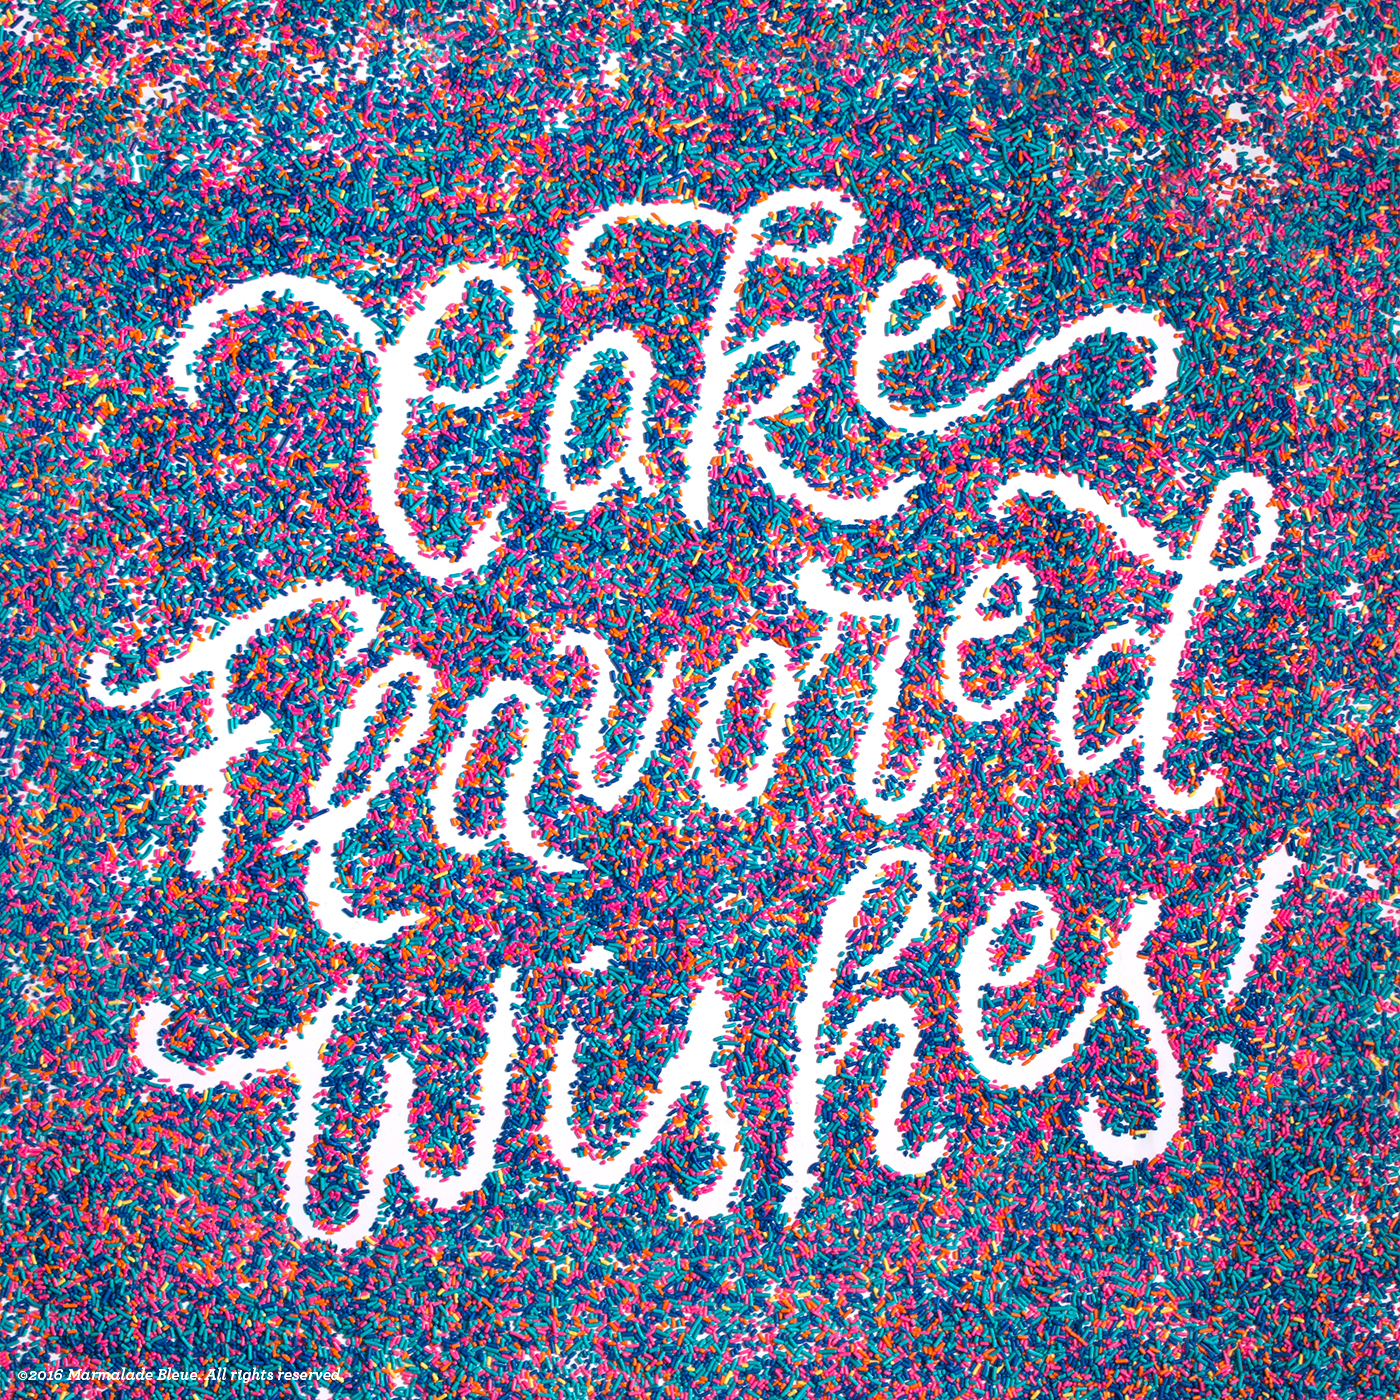 Cake-Flavored-Wishes-square.jpg